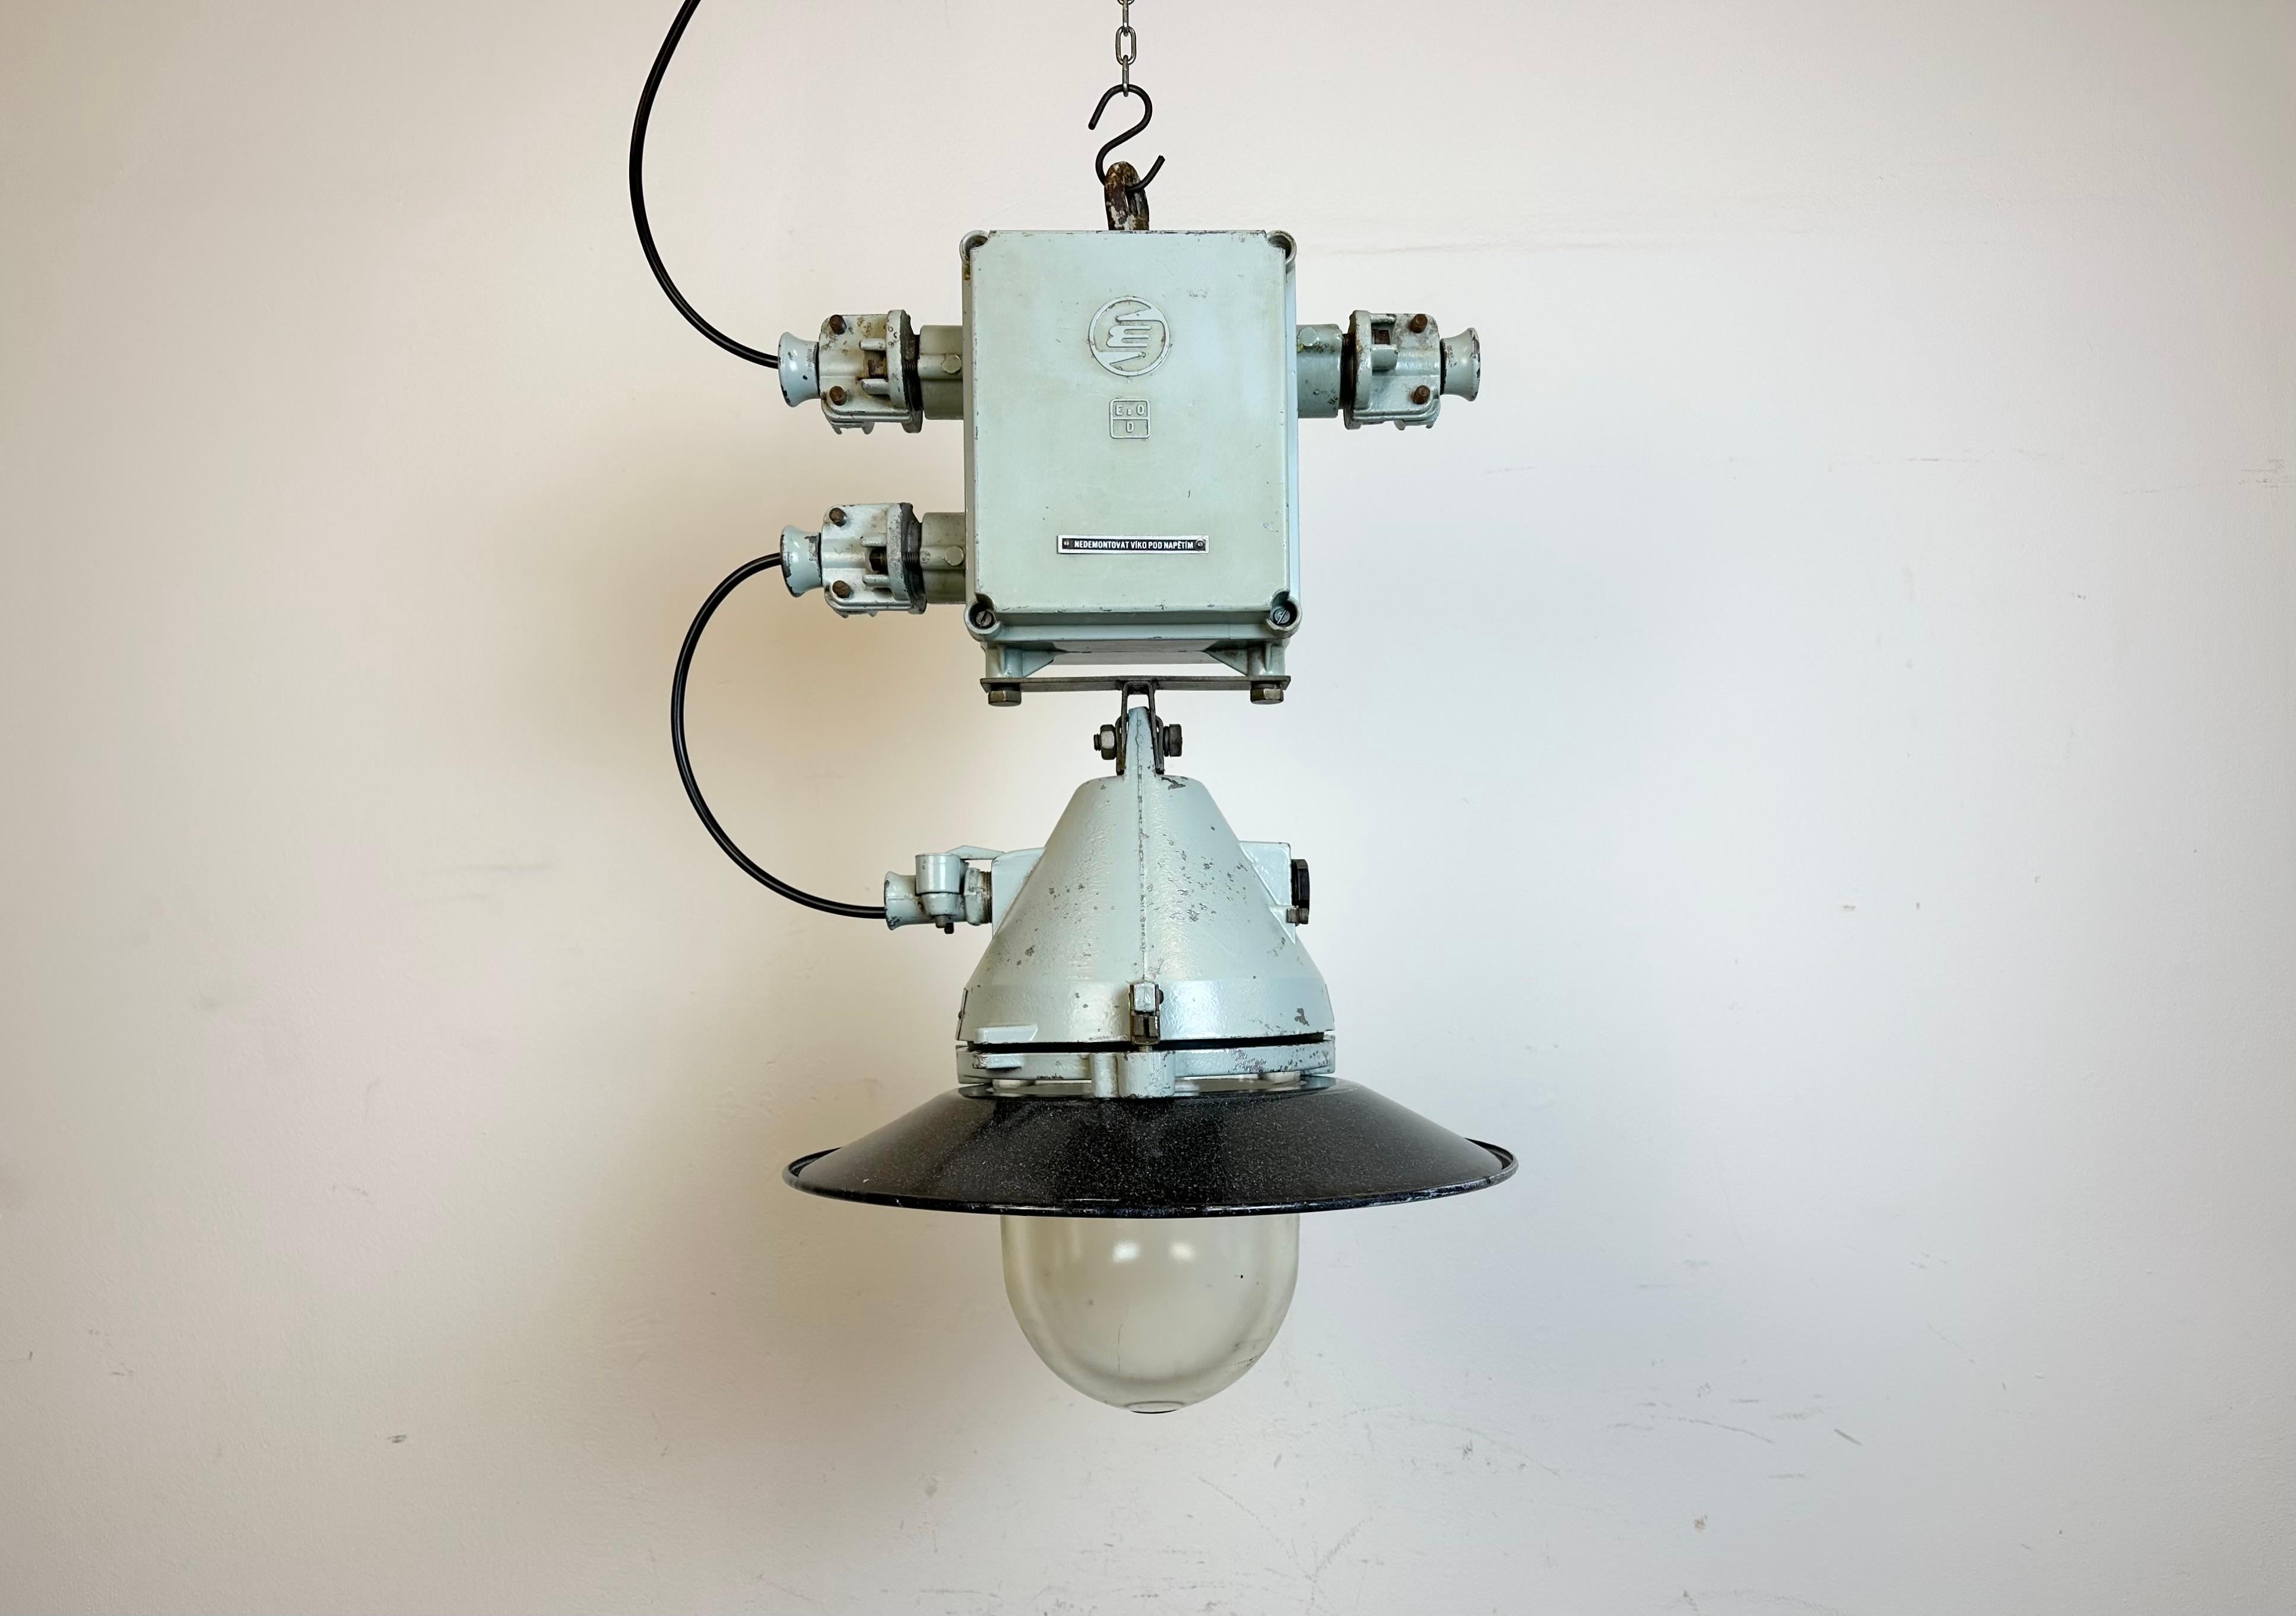 Grey industrial lamp with massive protective glass bulb made by Elektrosvit in former Czechoslovakia during the 1970s.It features a grey cast aluminium body, a clear glass and a grey enameled shade with white interior. Porcelain socket requires